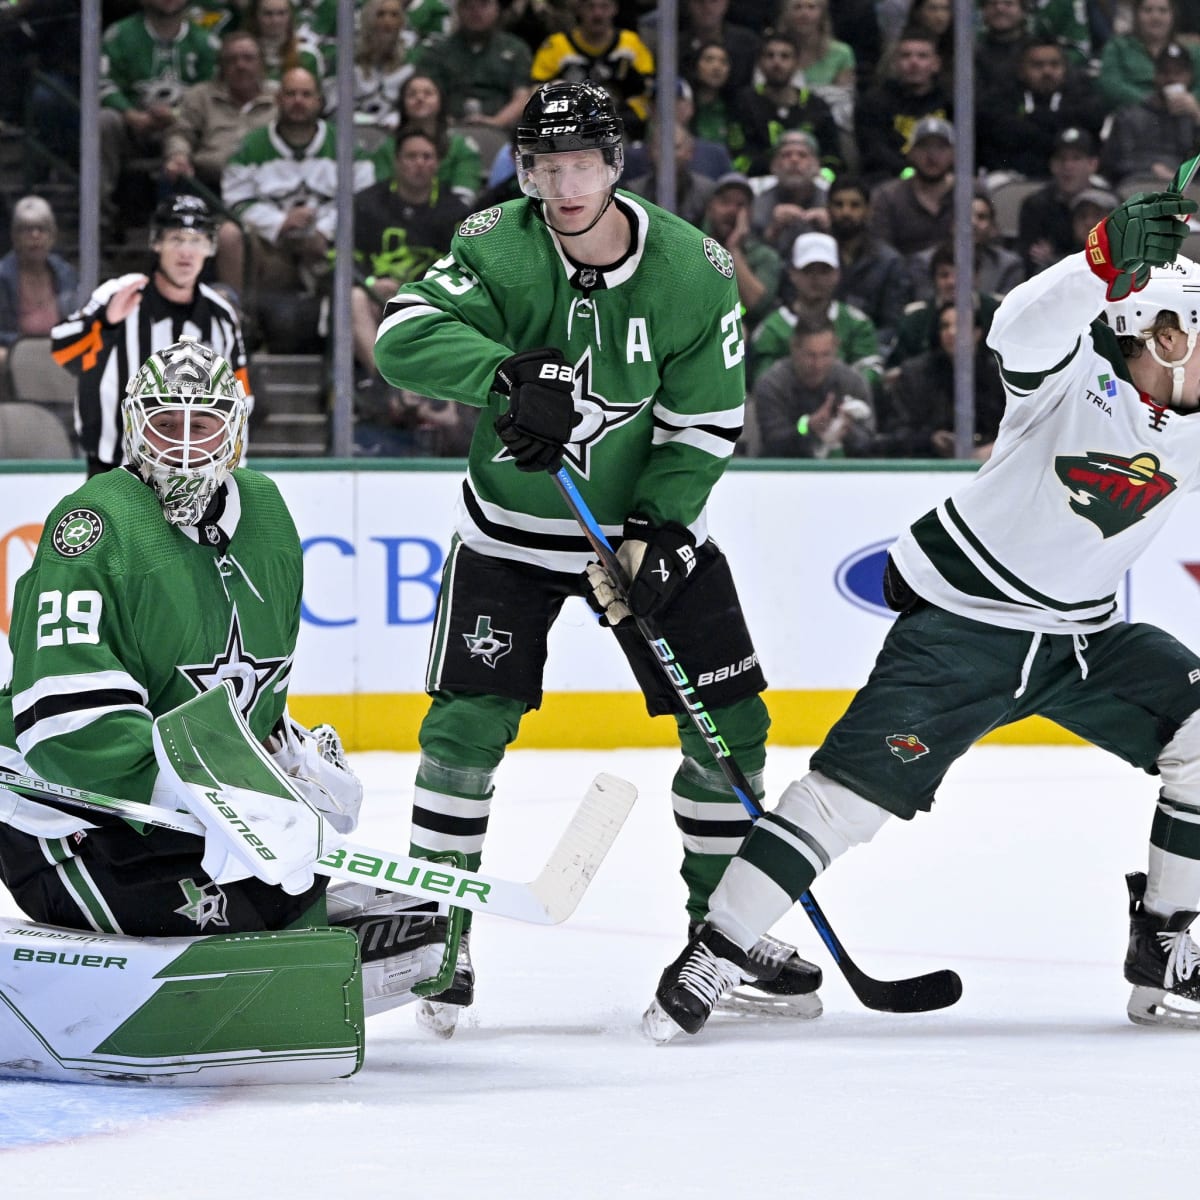 What exactly fueled Wild to double overtime win over Stars